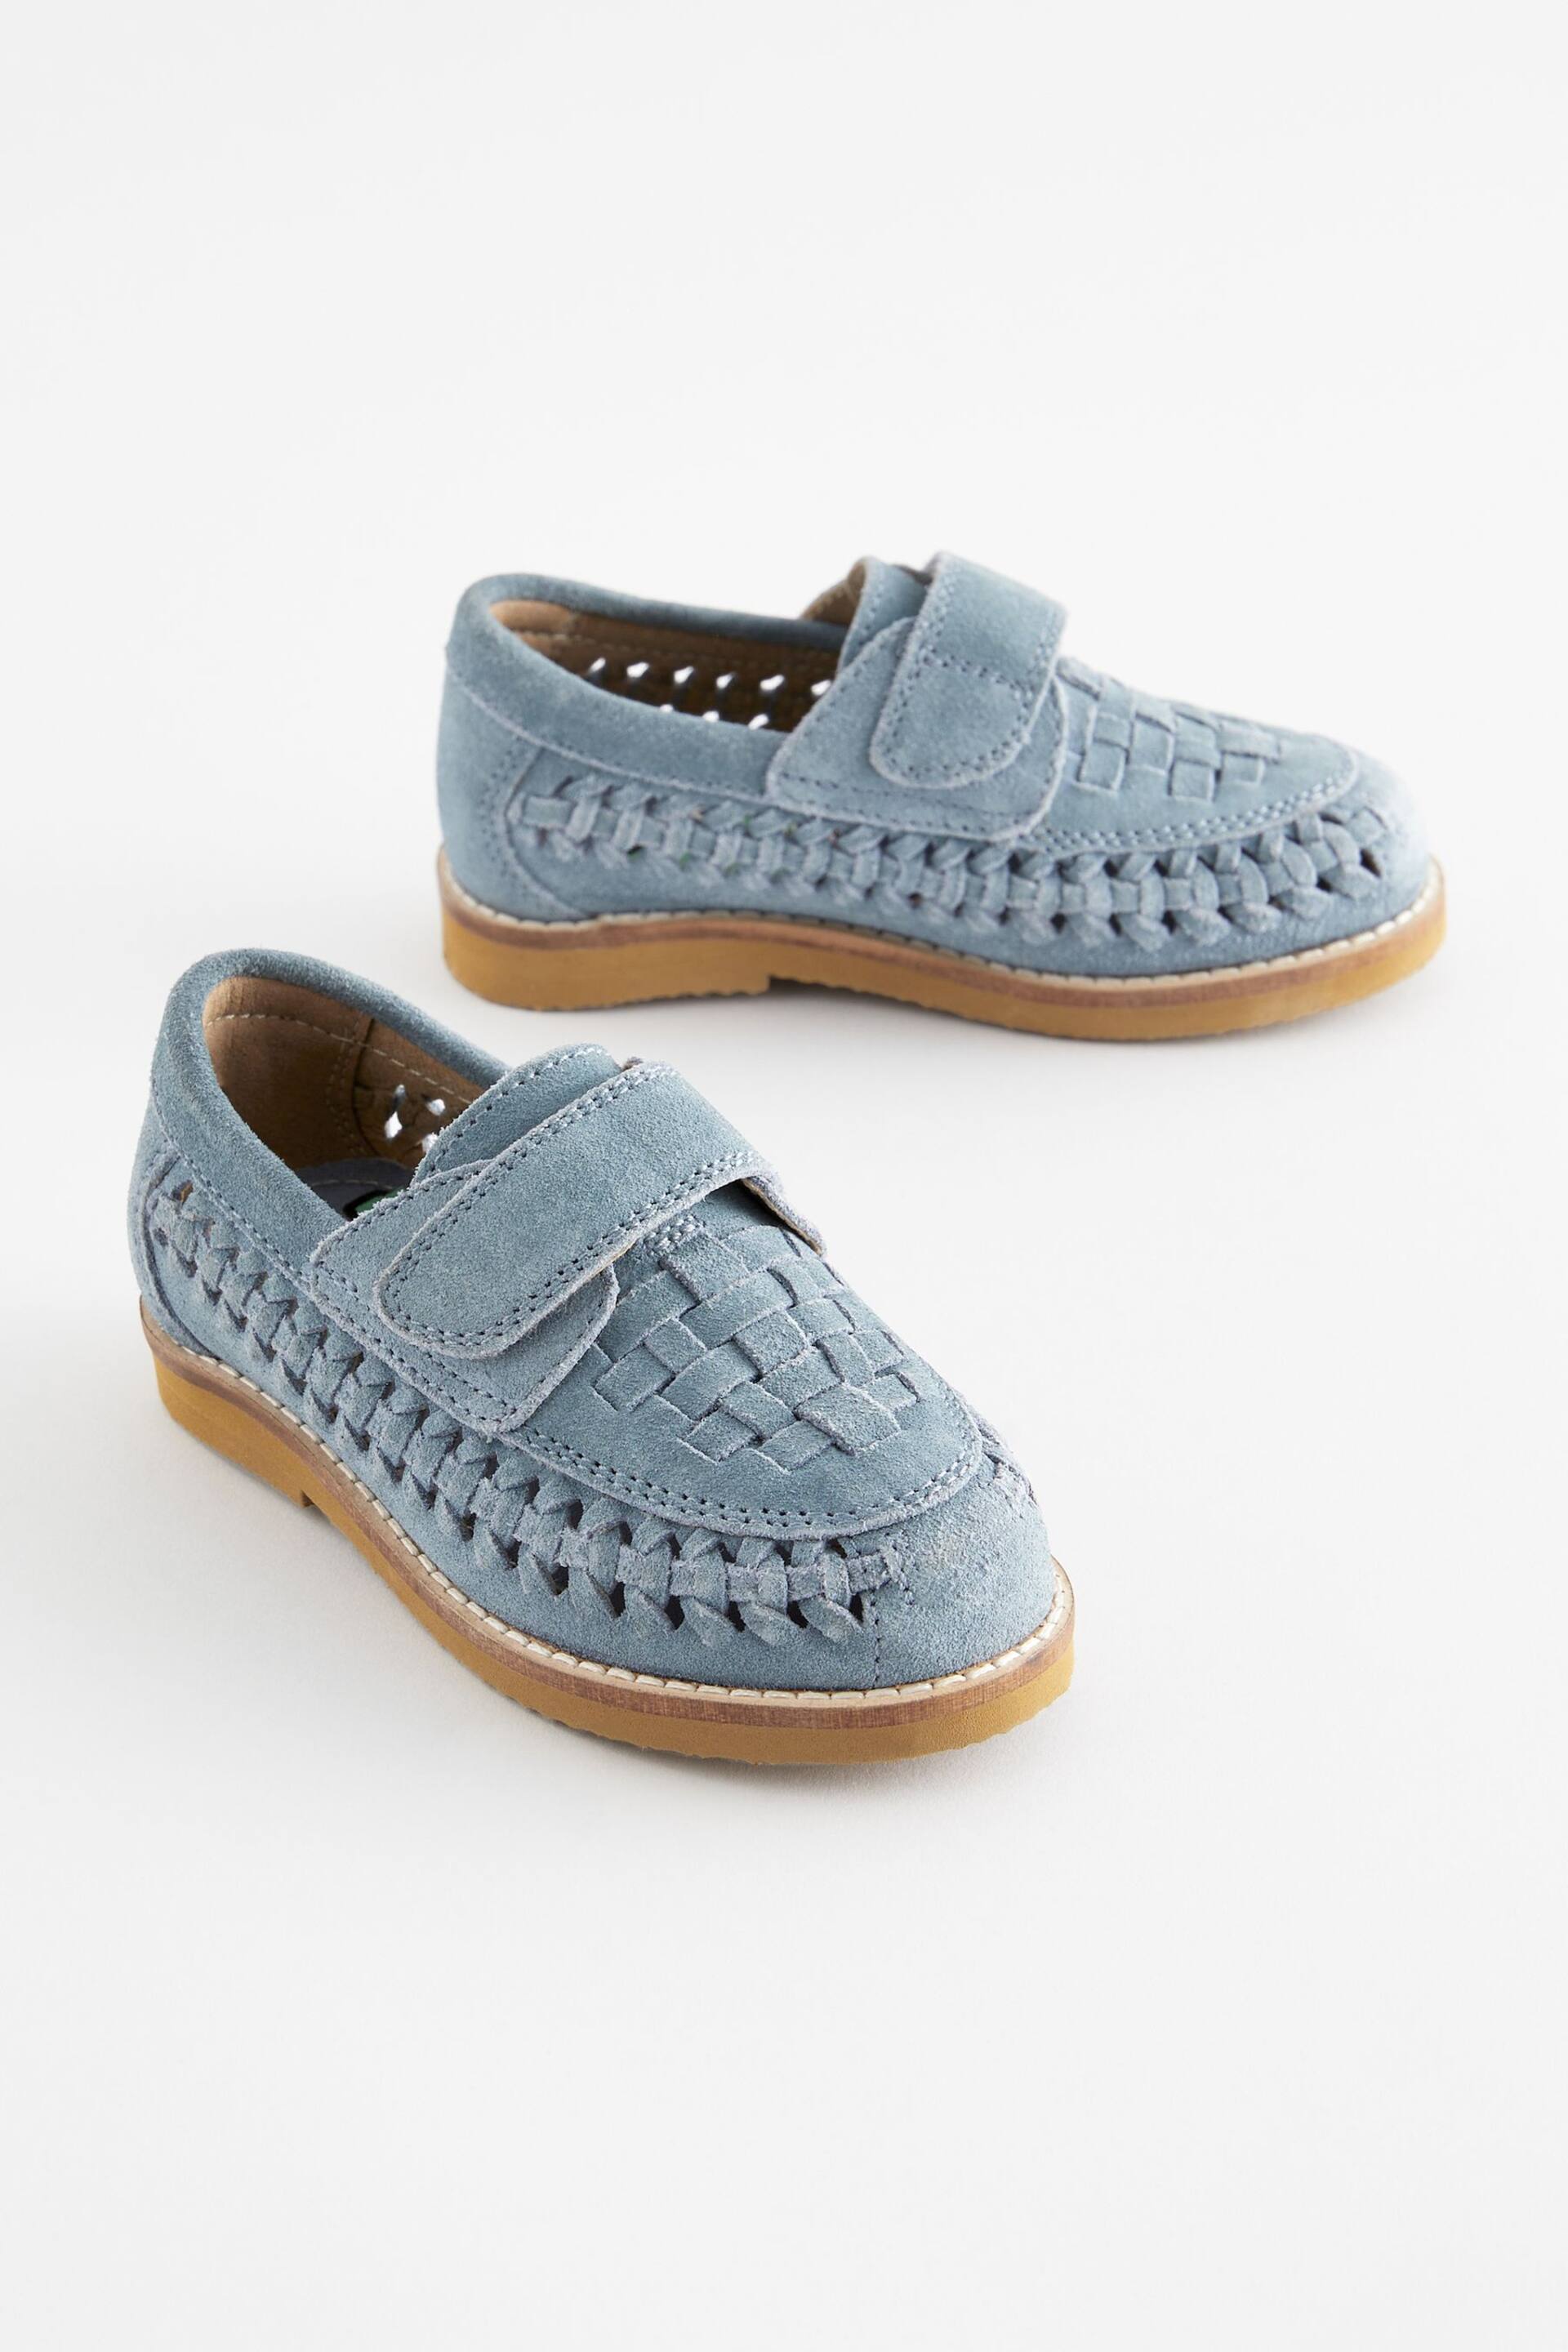 Blue Woven Loafers - Image 1 of 5